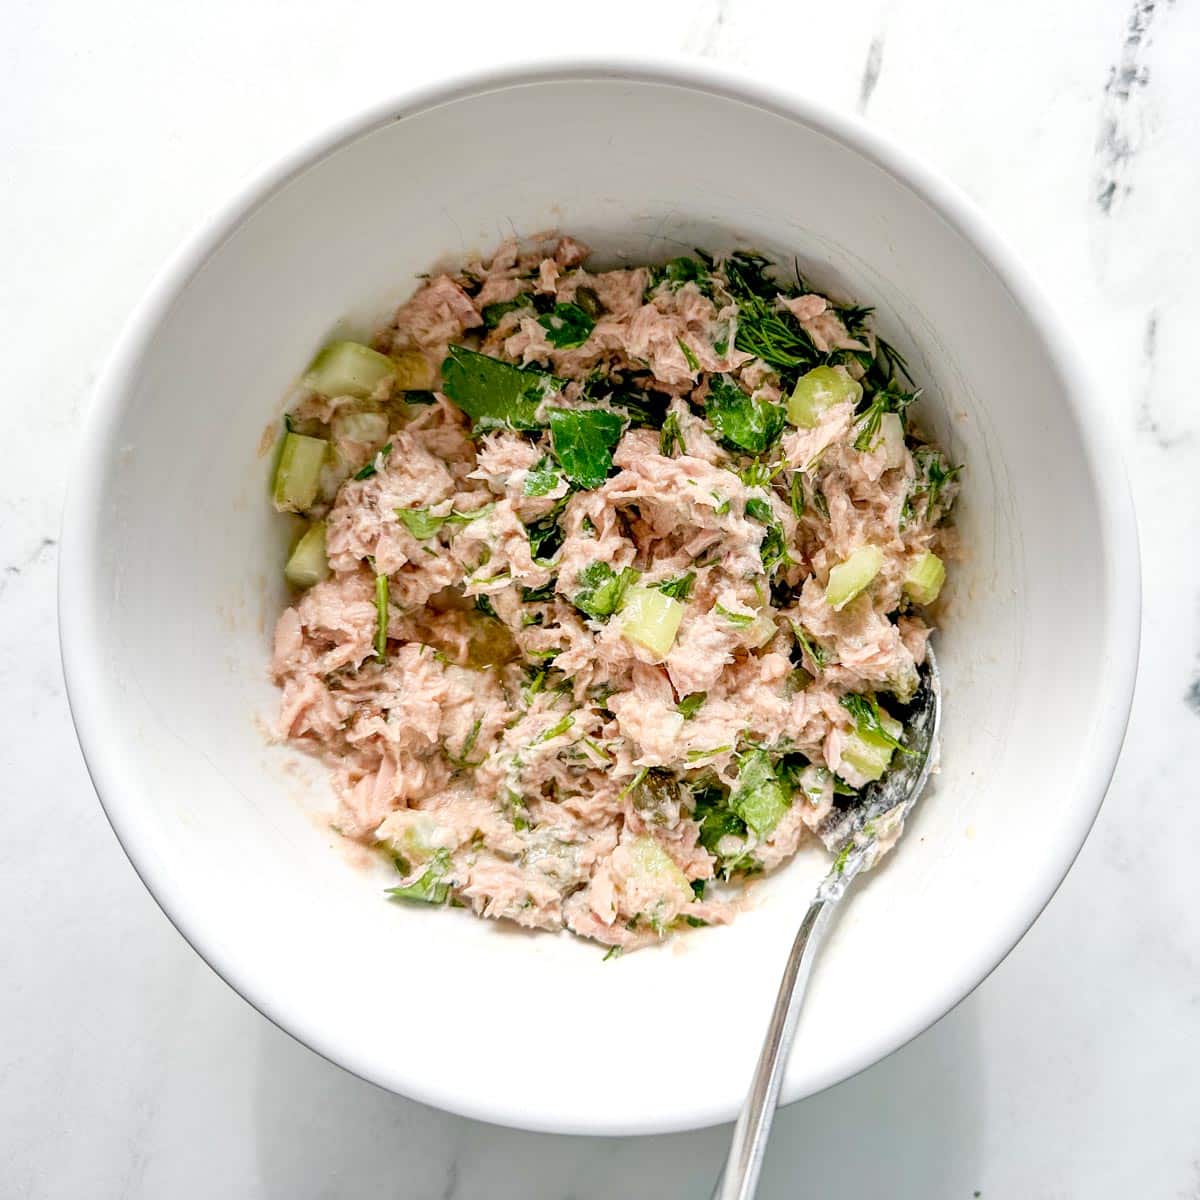 The ingredients for healthy tuna salad without mayo are mixed in a white bowl.